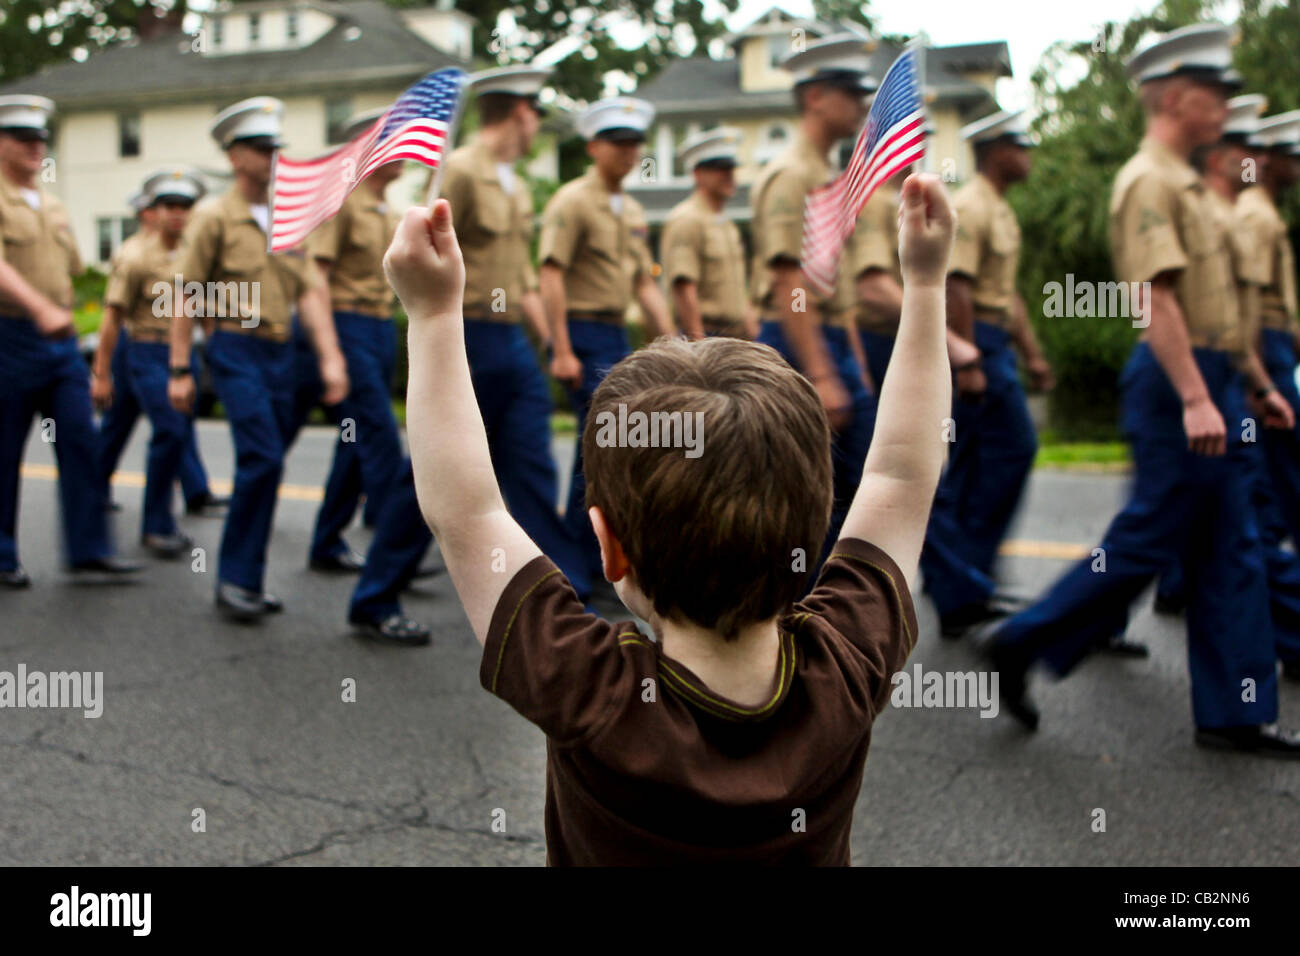 A small boy waves flags as US Marines march past in the Larchmont Memorial Day parade May 24, 2012 in Larchmont, NY. The US marks Memorial Day this weekend. Stock Photo